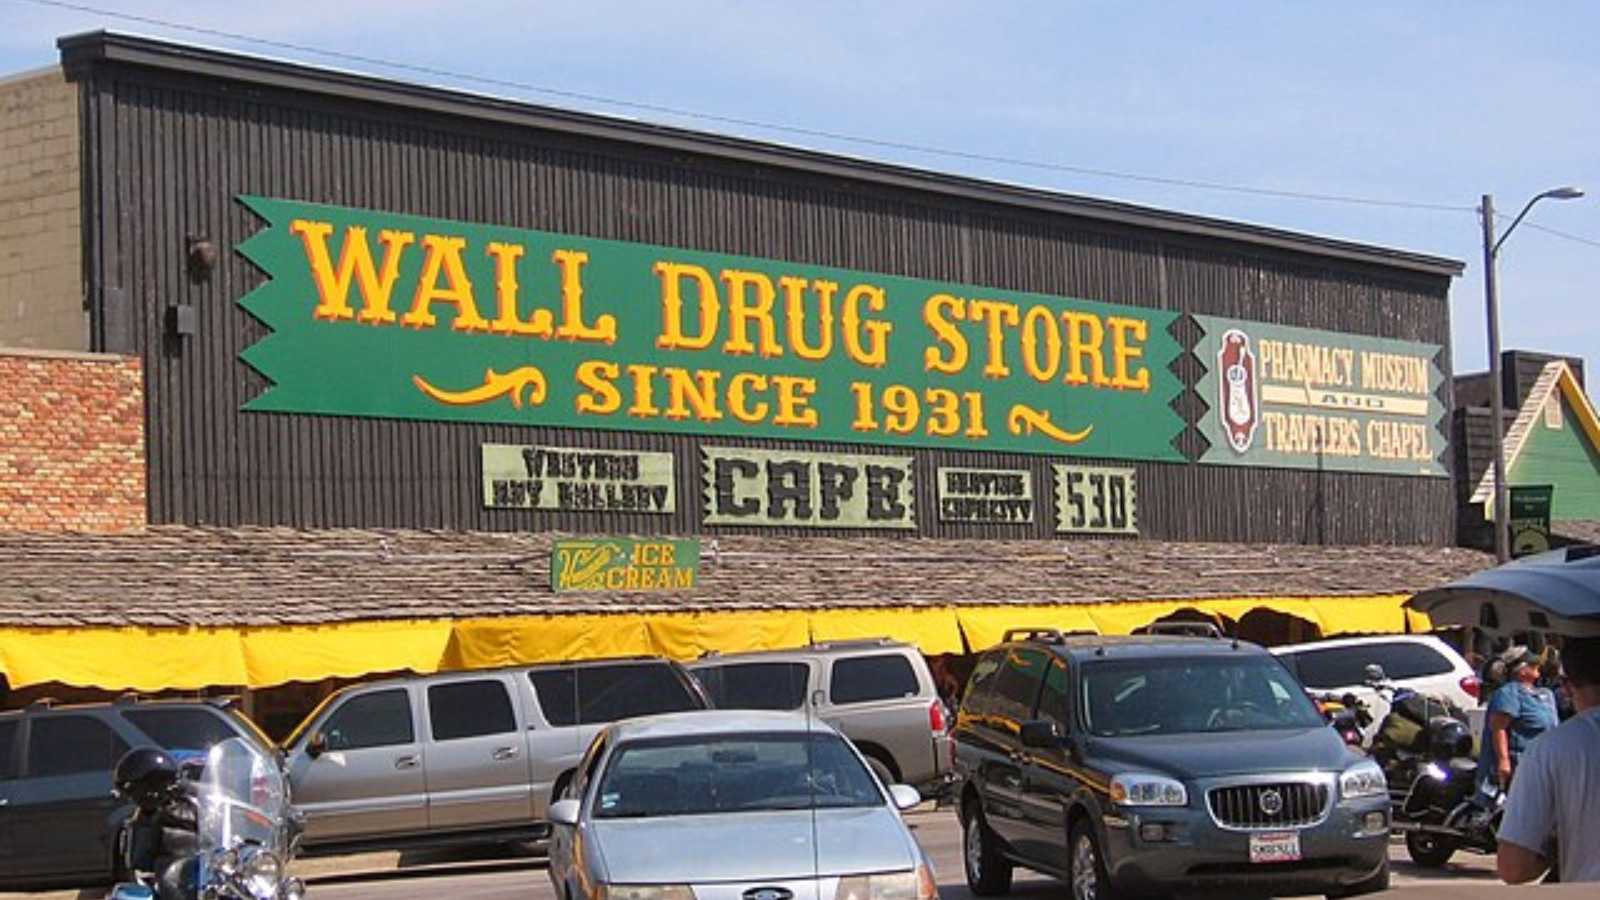 <p><span>Wall Drug is another stop that promises the moon but delivers a dusty collection of knick-knacks and gimmicks. It's a road trip staple for some-but mainly as a punchline.</span></p>